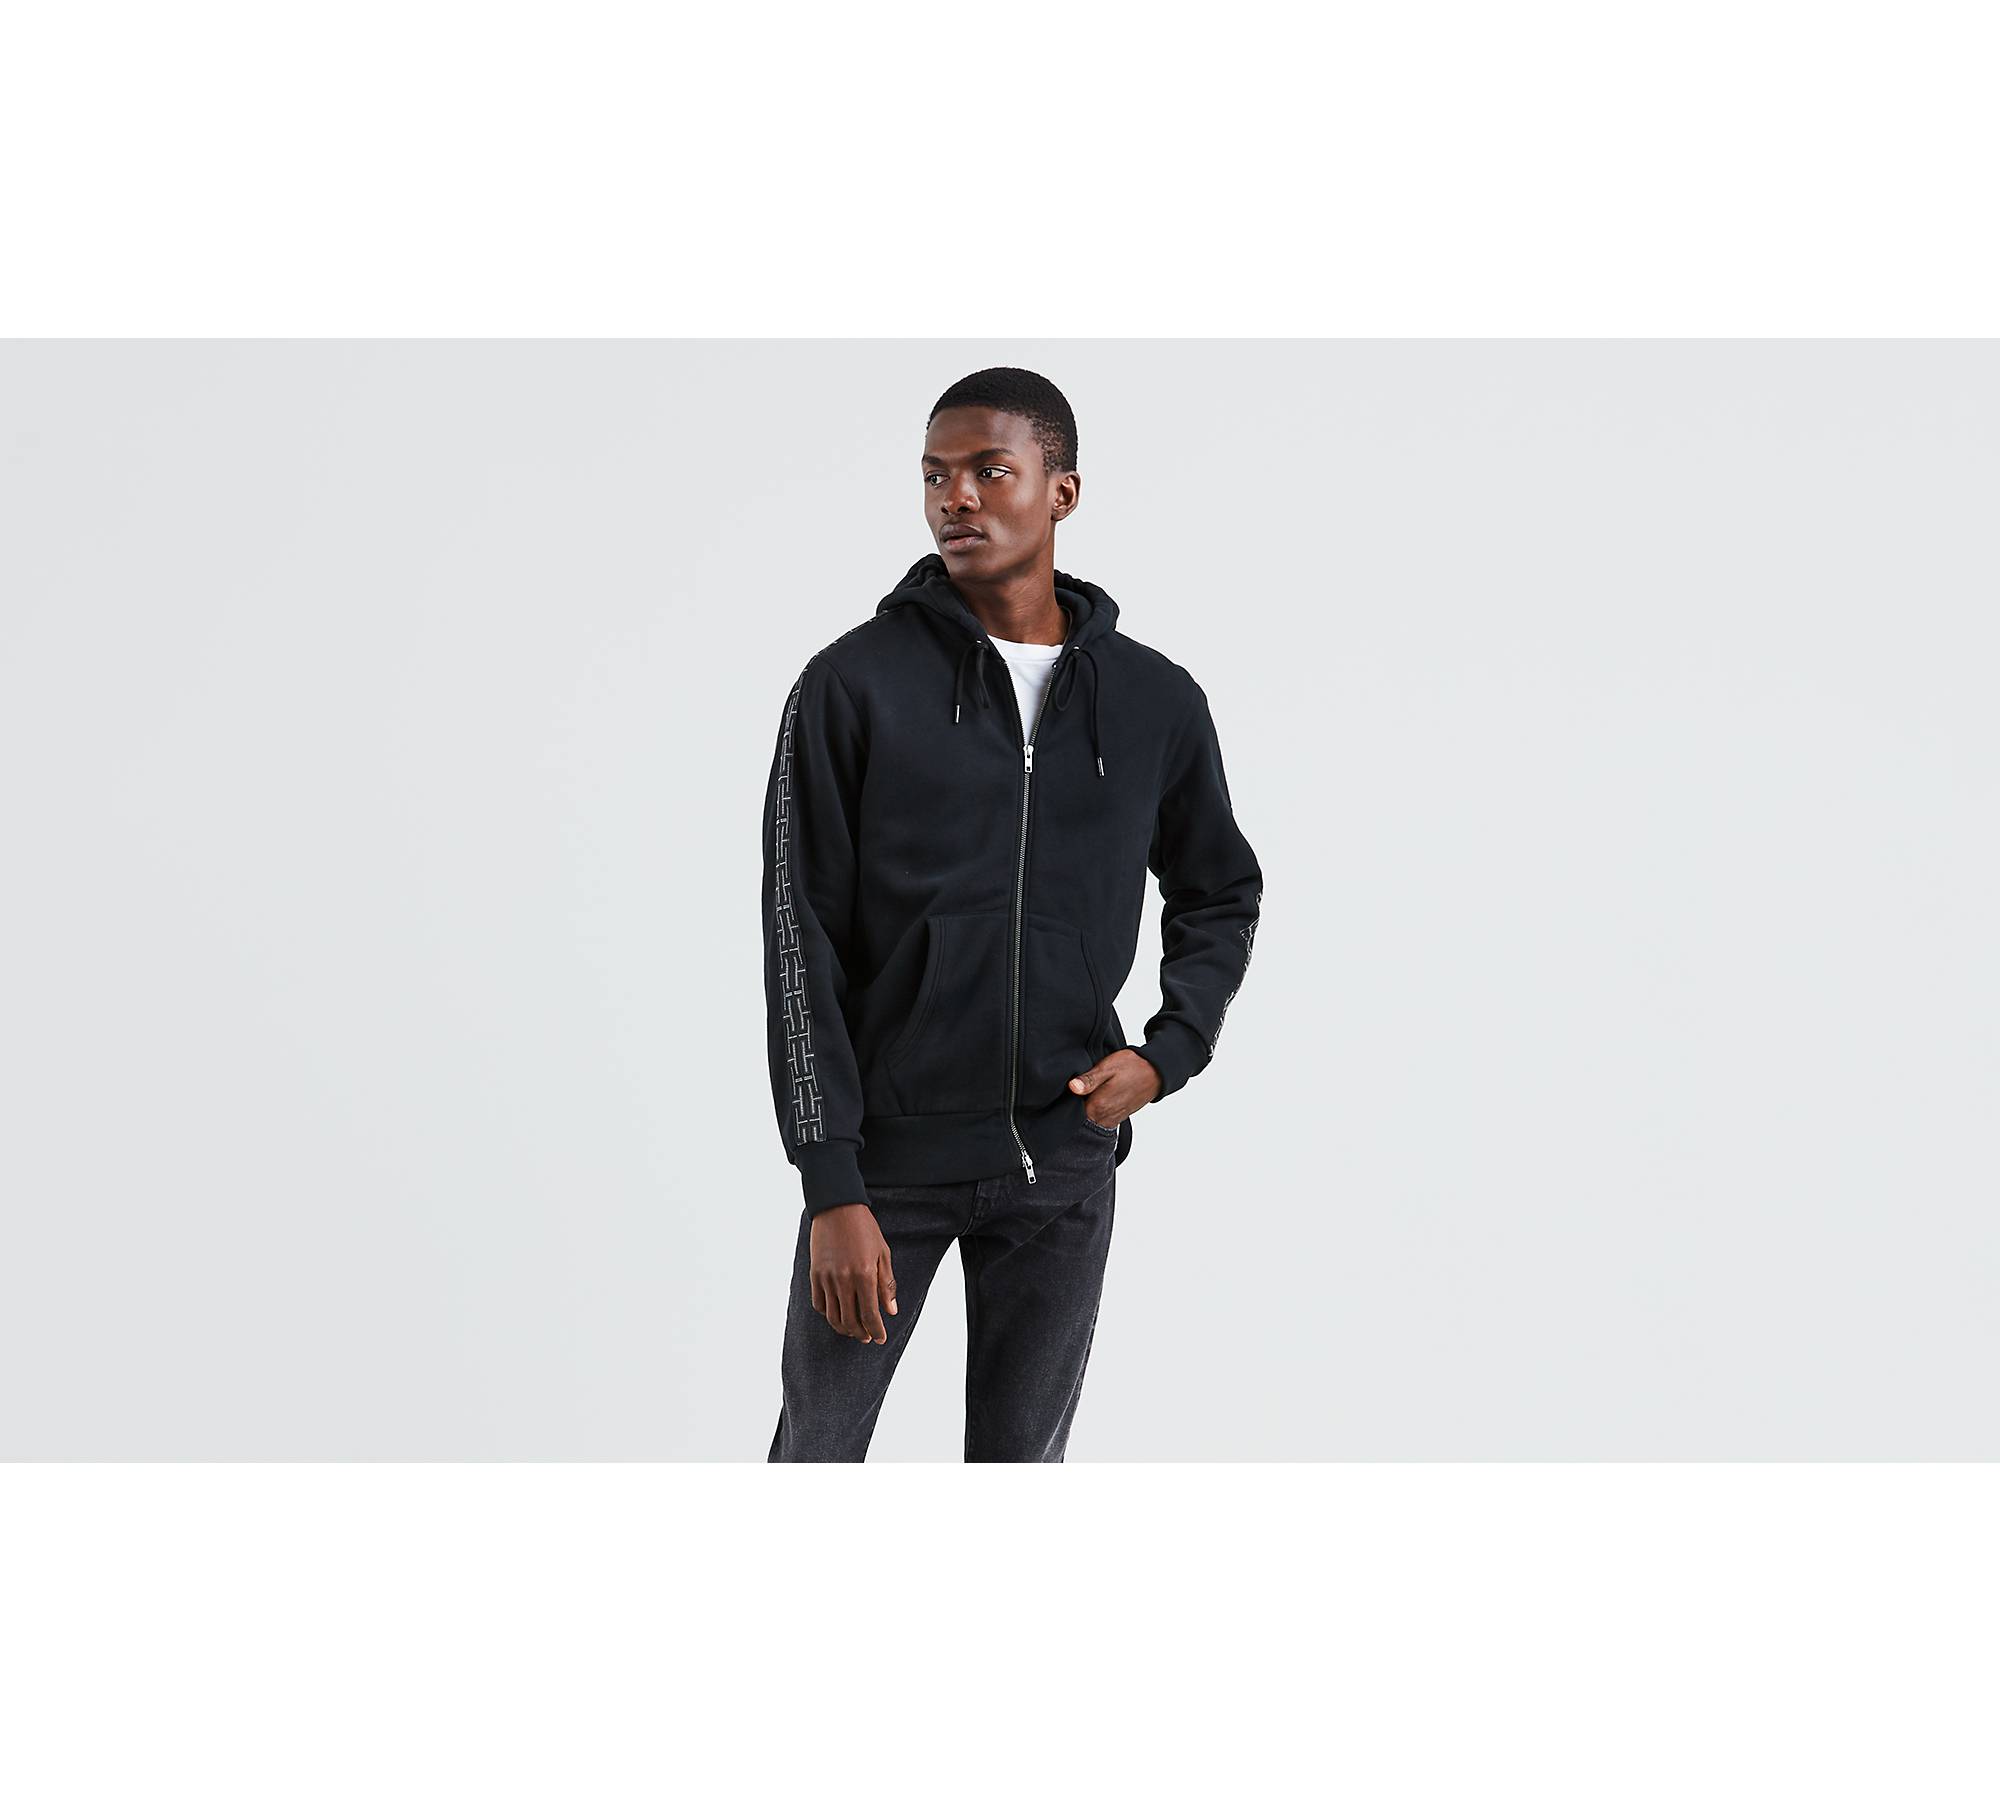 The latest collection of black zip up hoodies